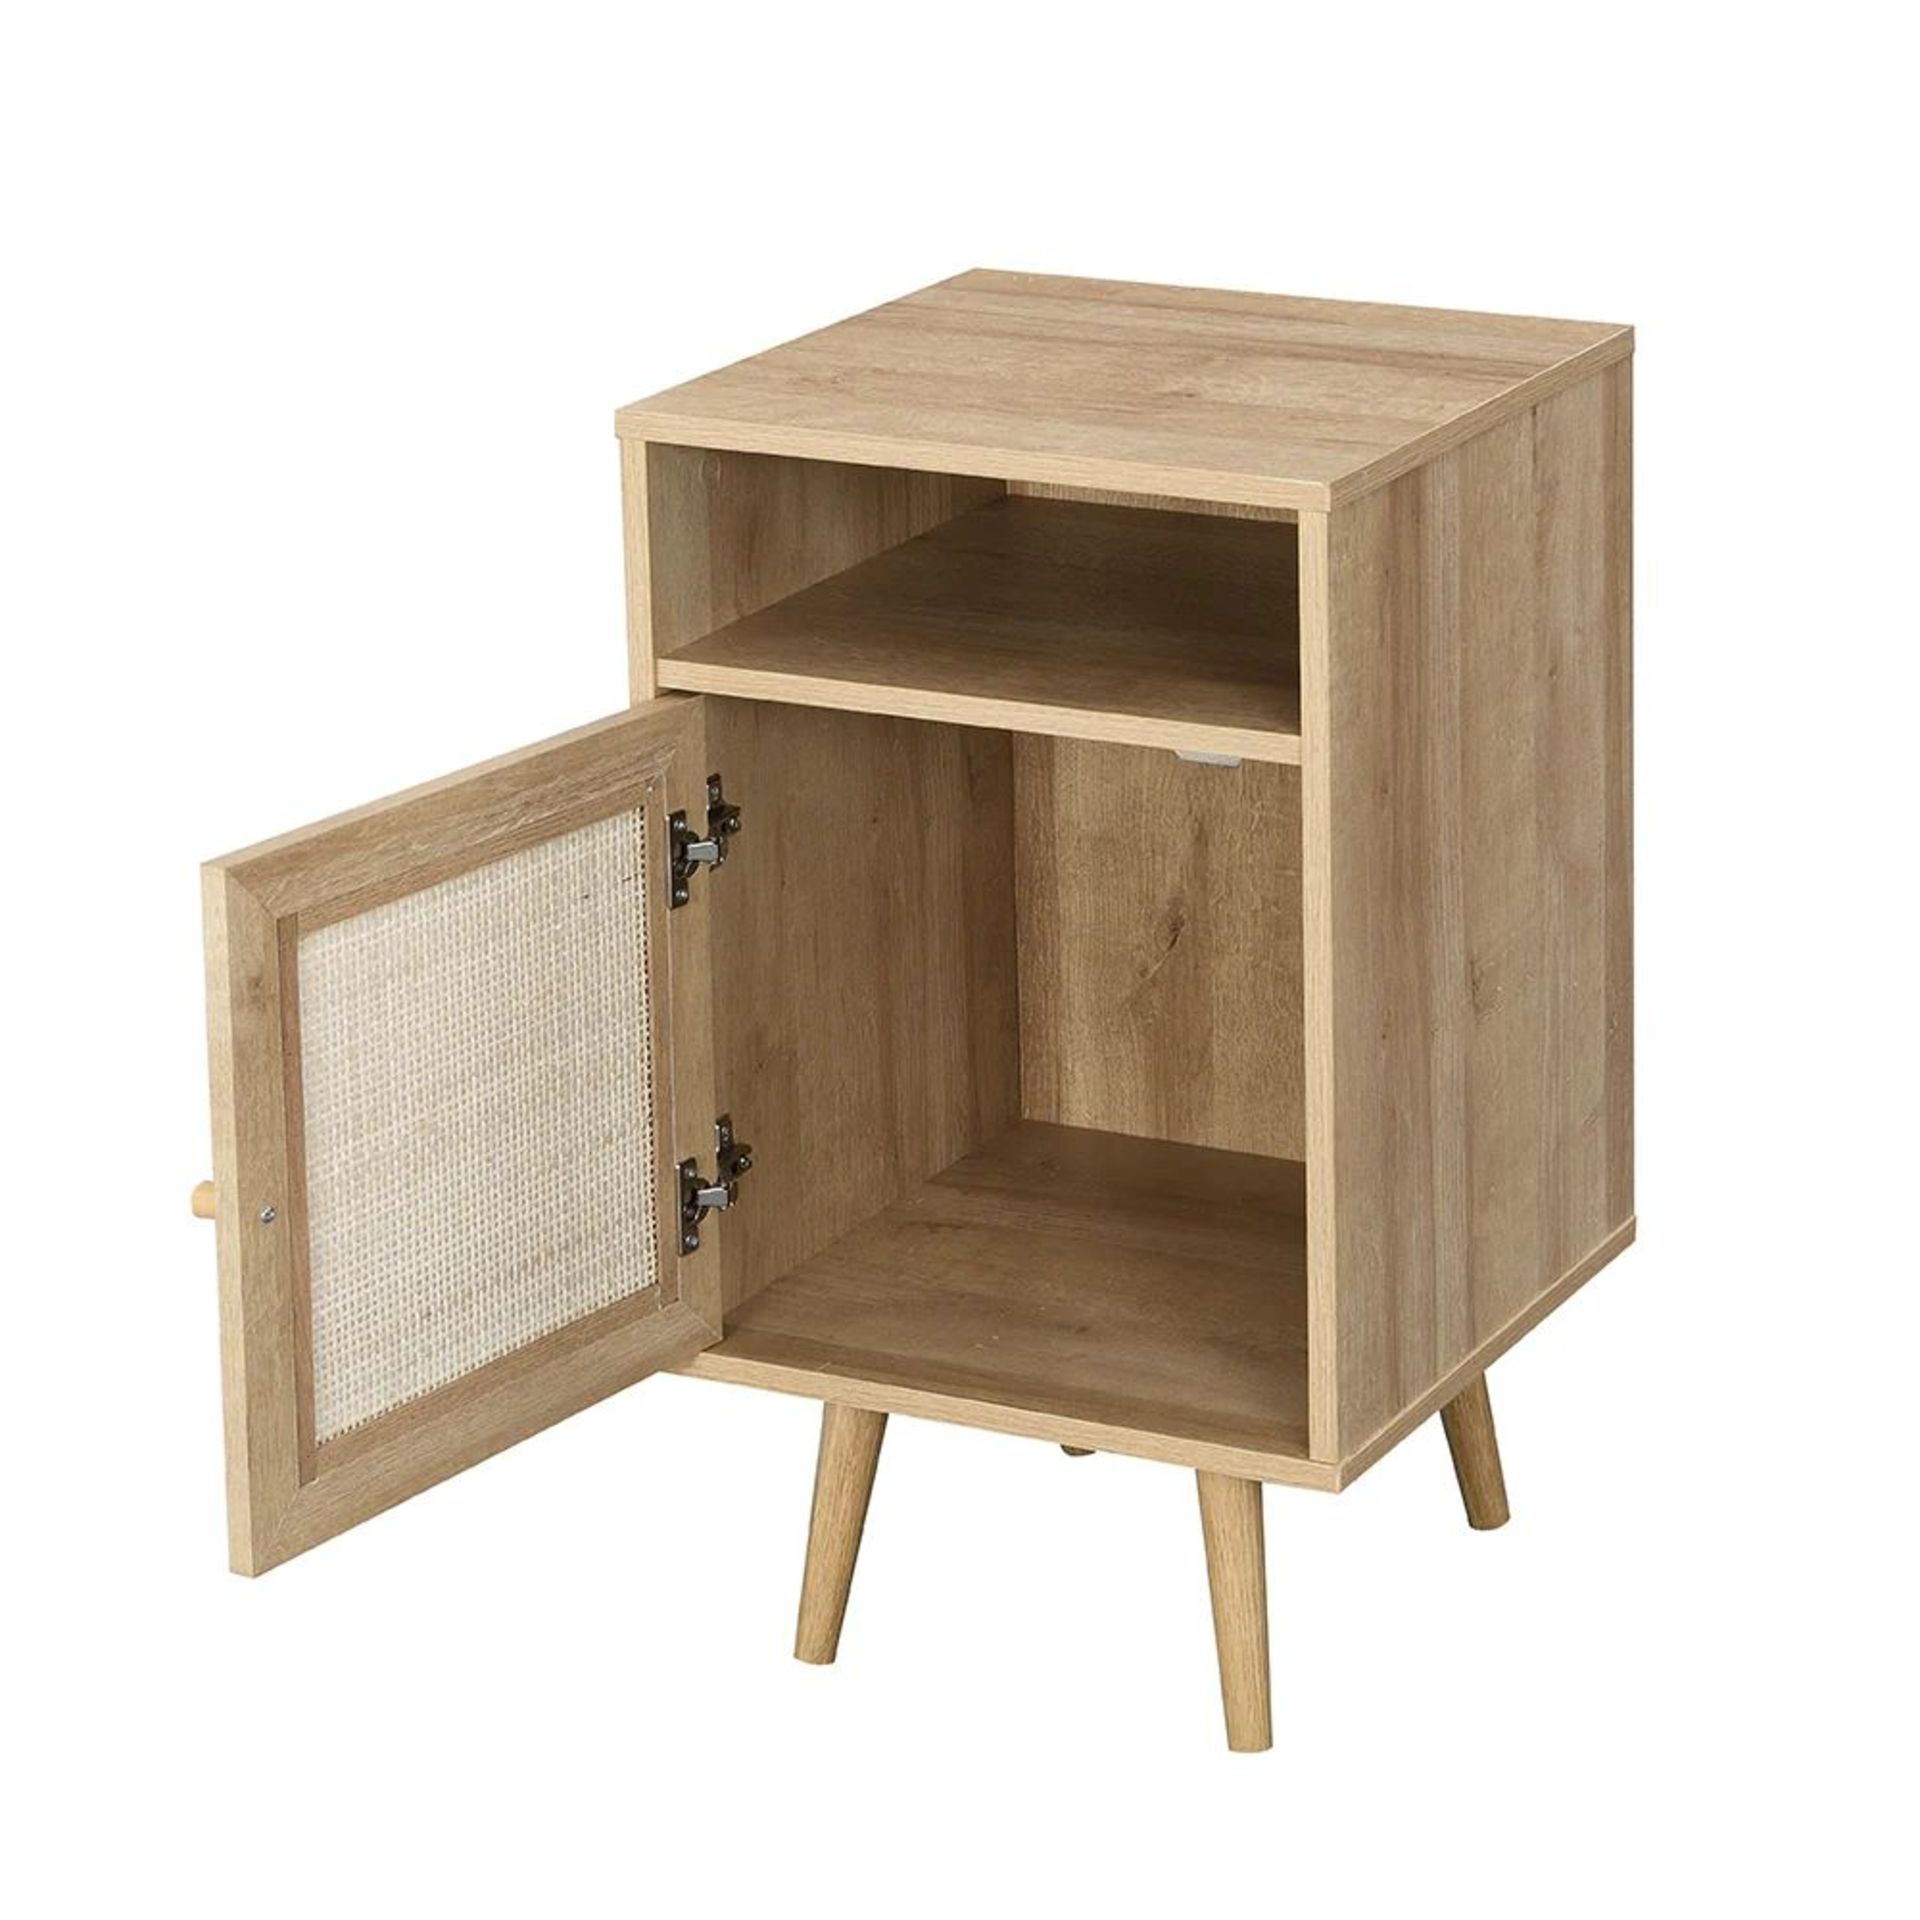 Frances Woven Rattan 1-Door Bedside Table in Natural Colour. - ER30. RRP £129.99. Our Frances - Image 2 of 2